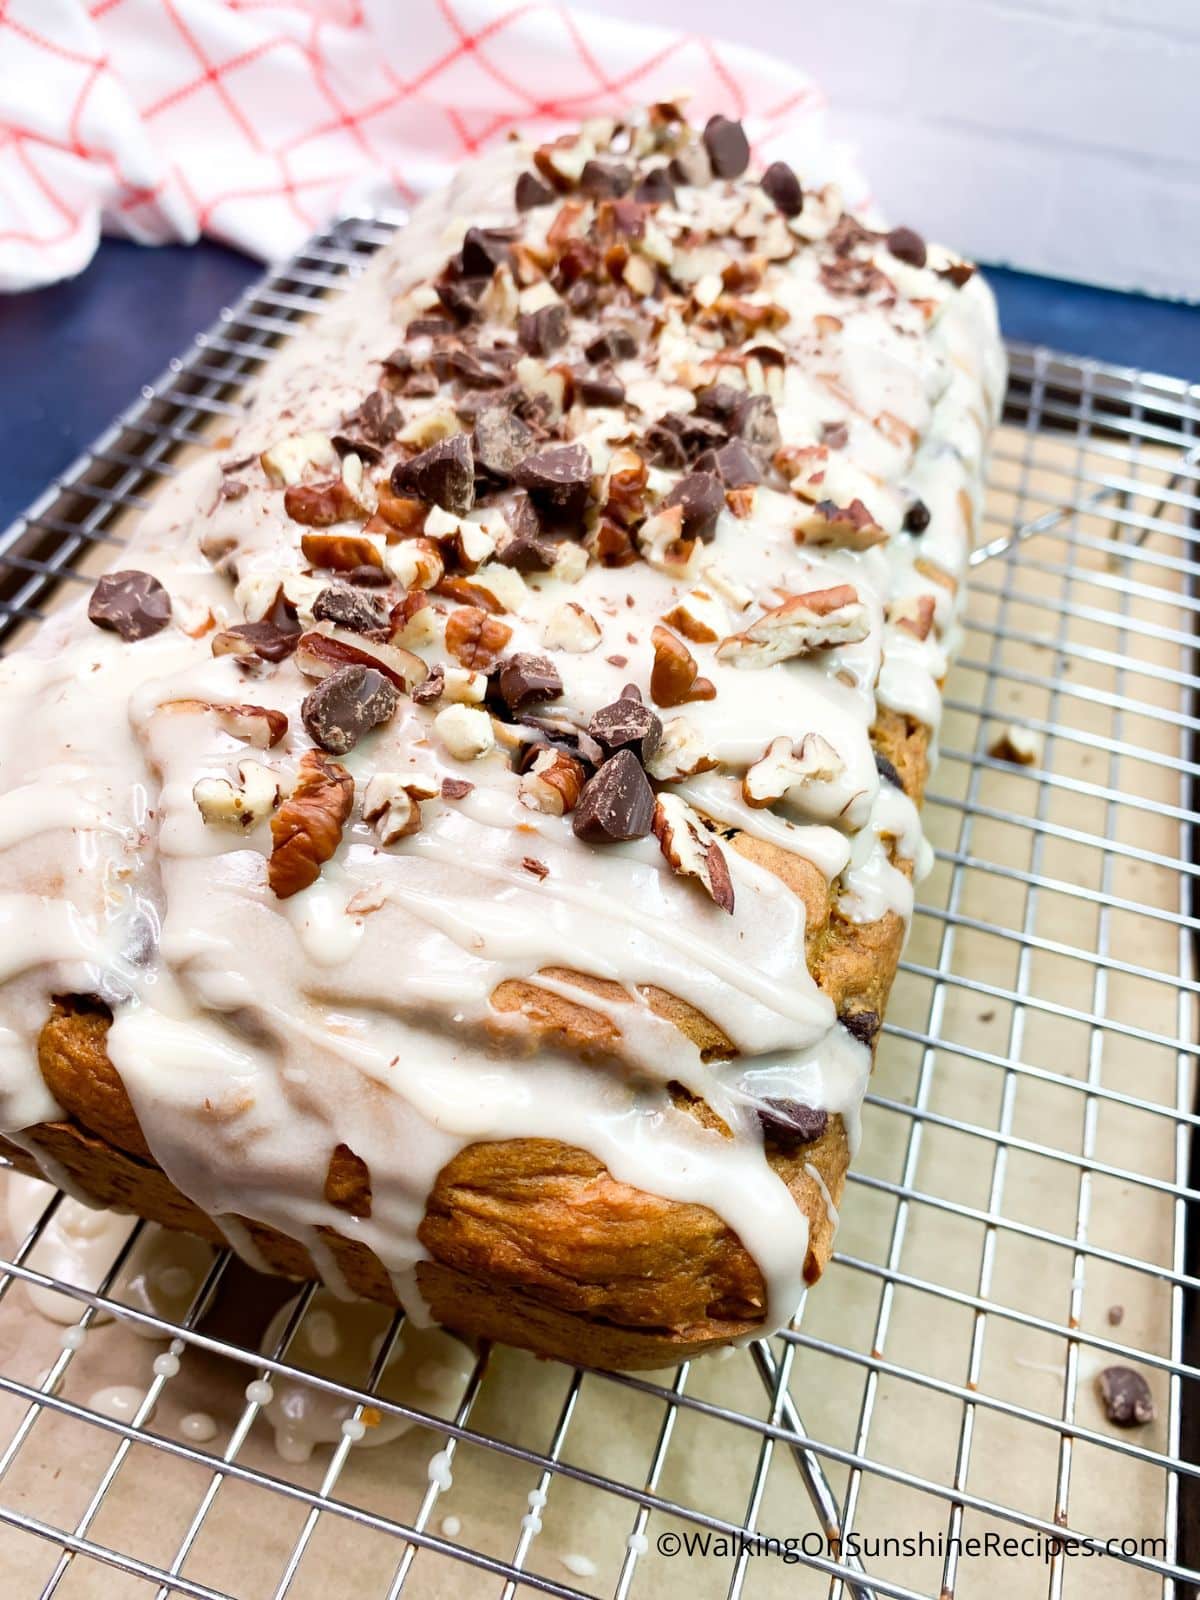 Top pumpkin bread with chopped walnuts and chocolate chips.